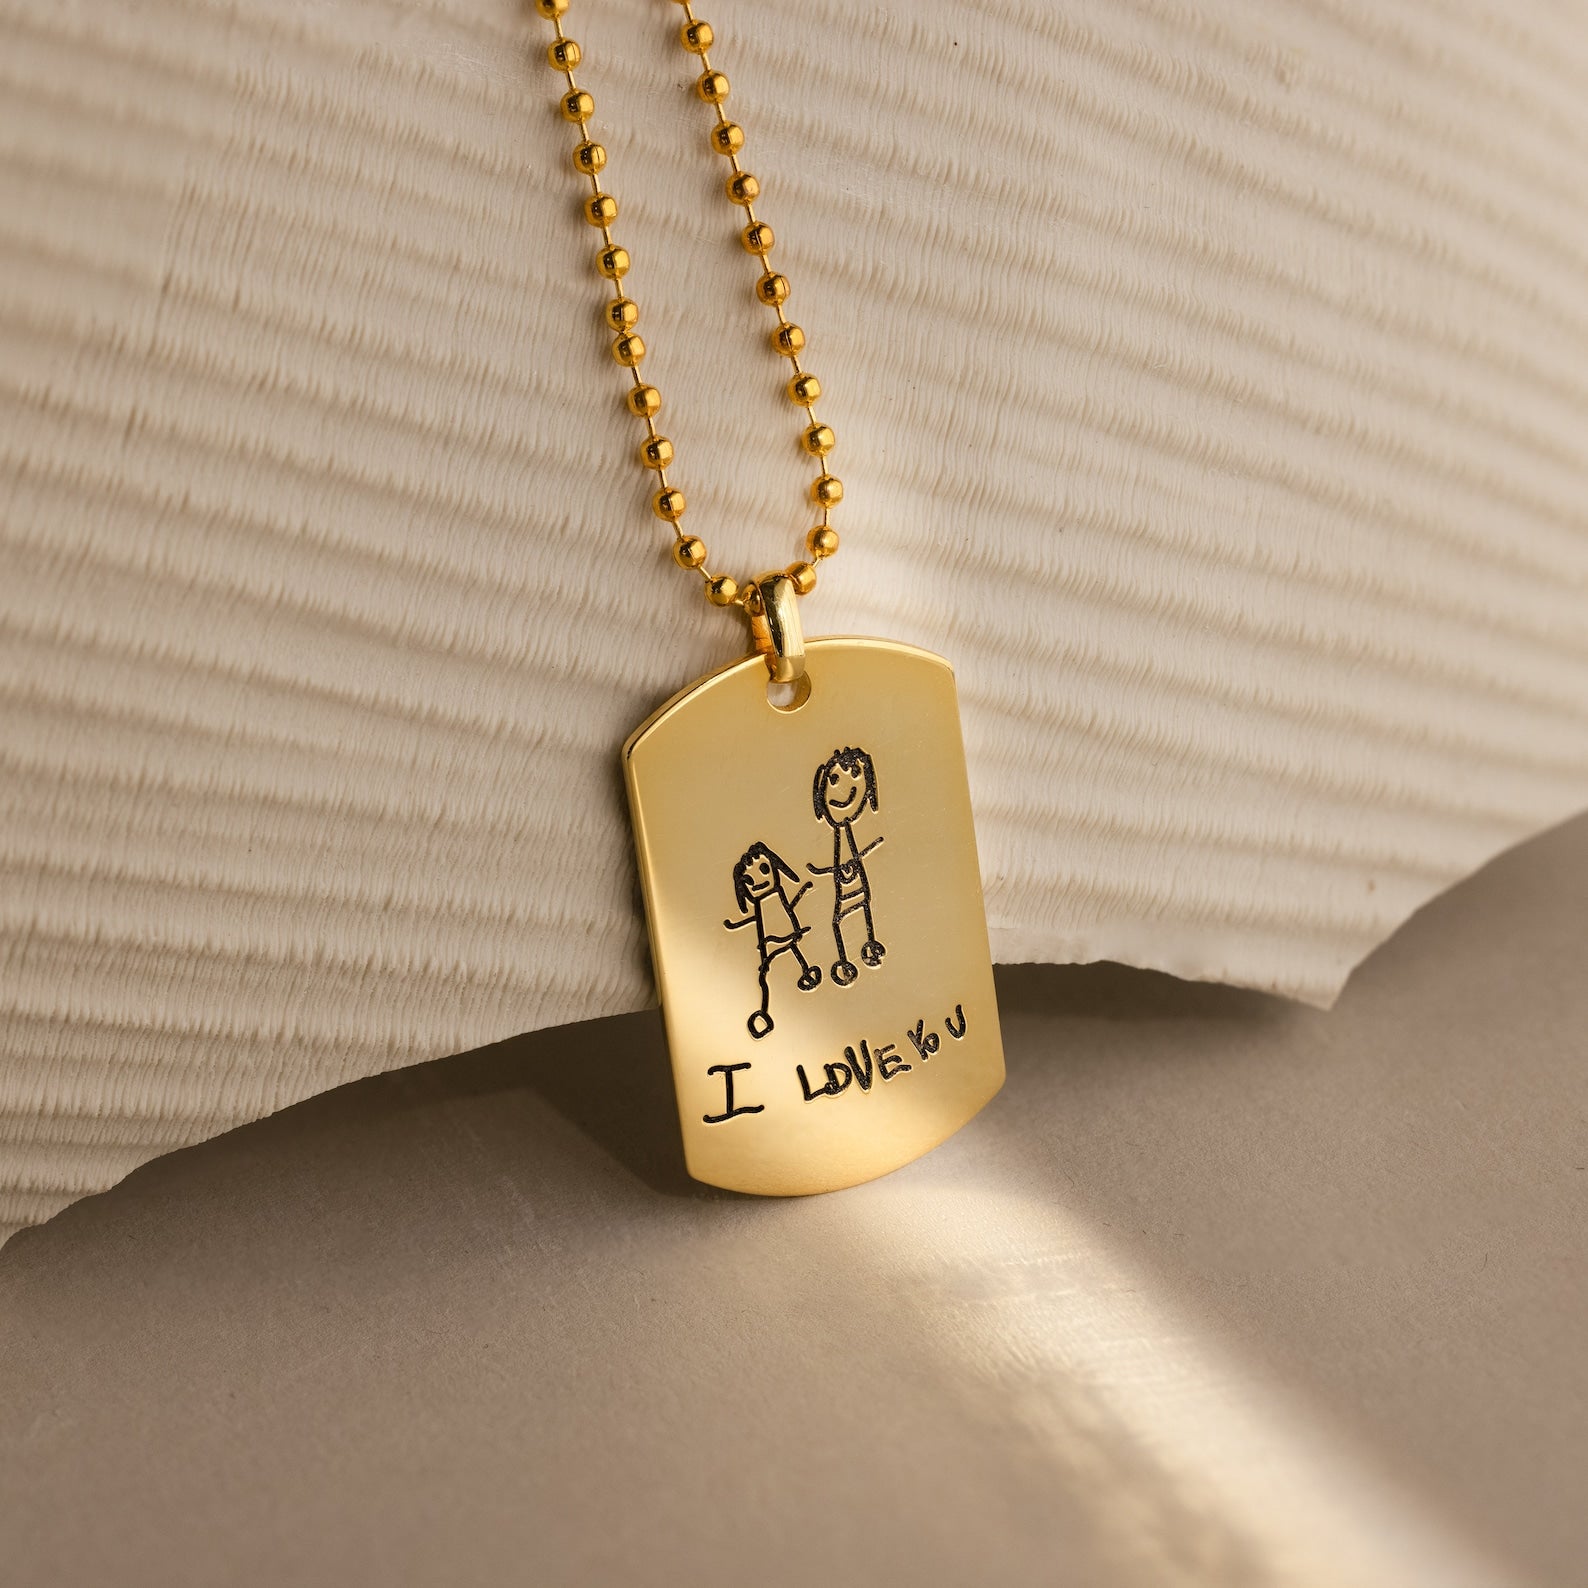 Engraved Men's Dog Tag Necklace Personalized Dog Tag Pendant